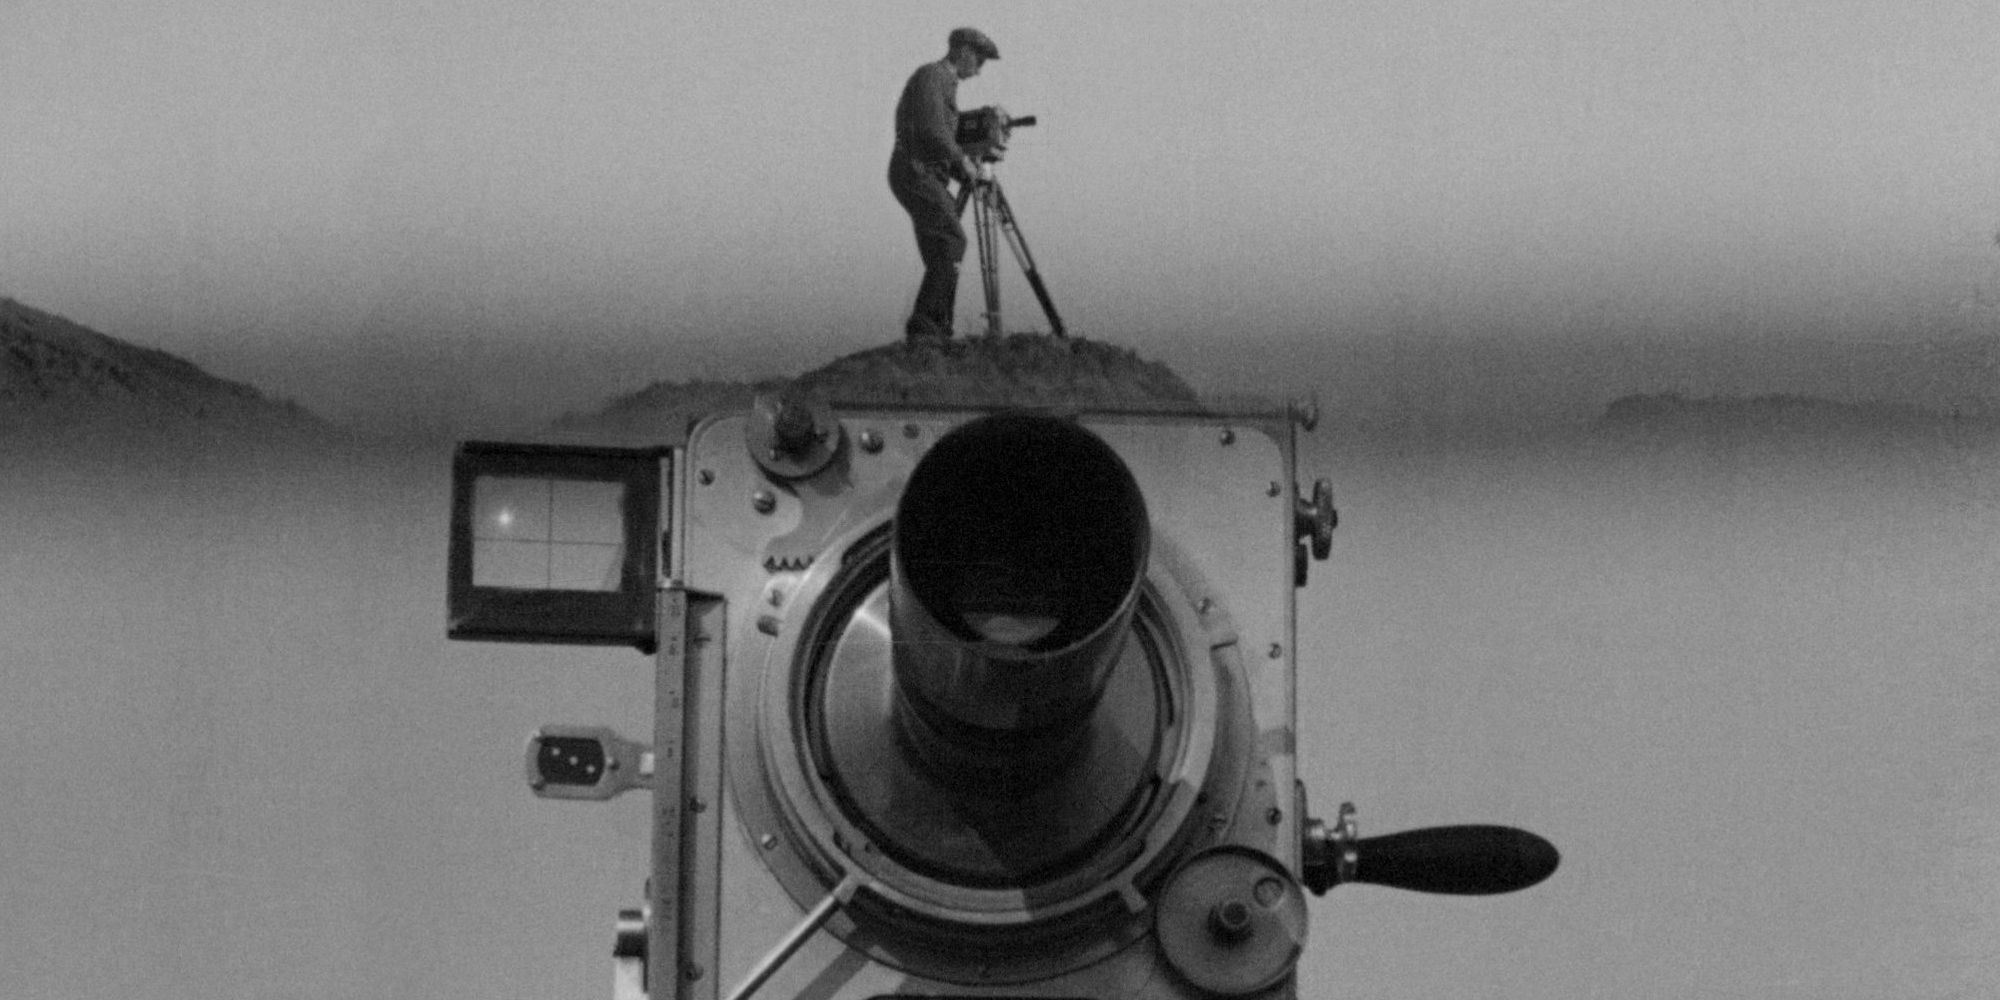 surrealist shot in Dziga Vertov's "Man With a Movie Camera", that man standing atop a giant movie camera